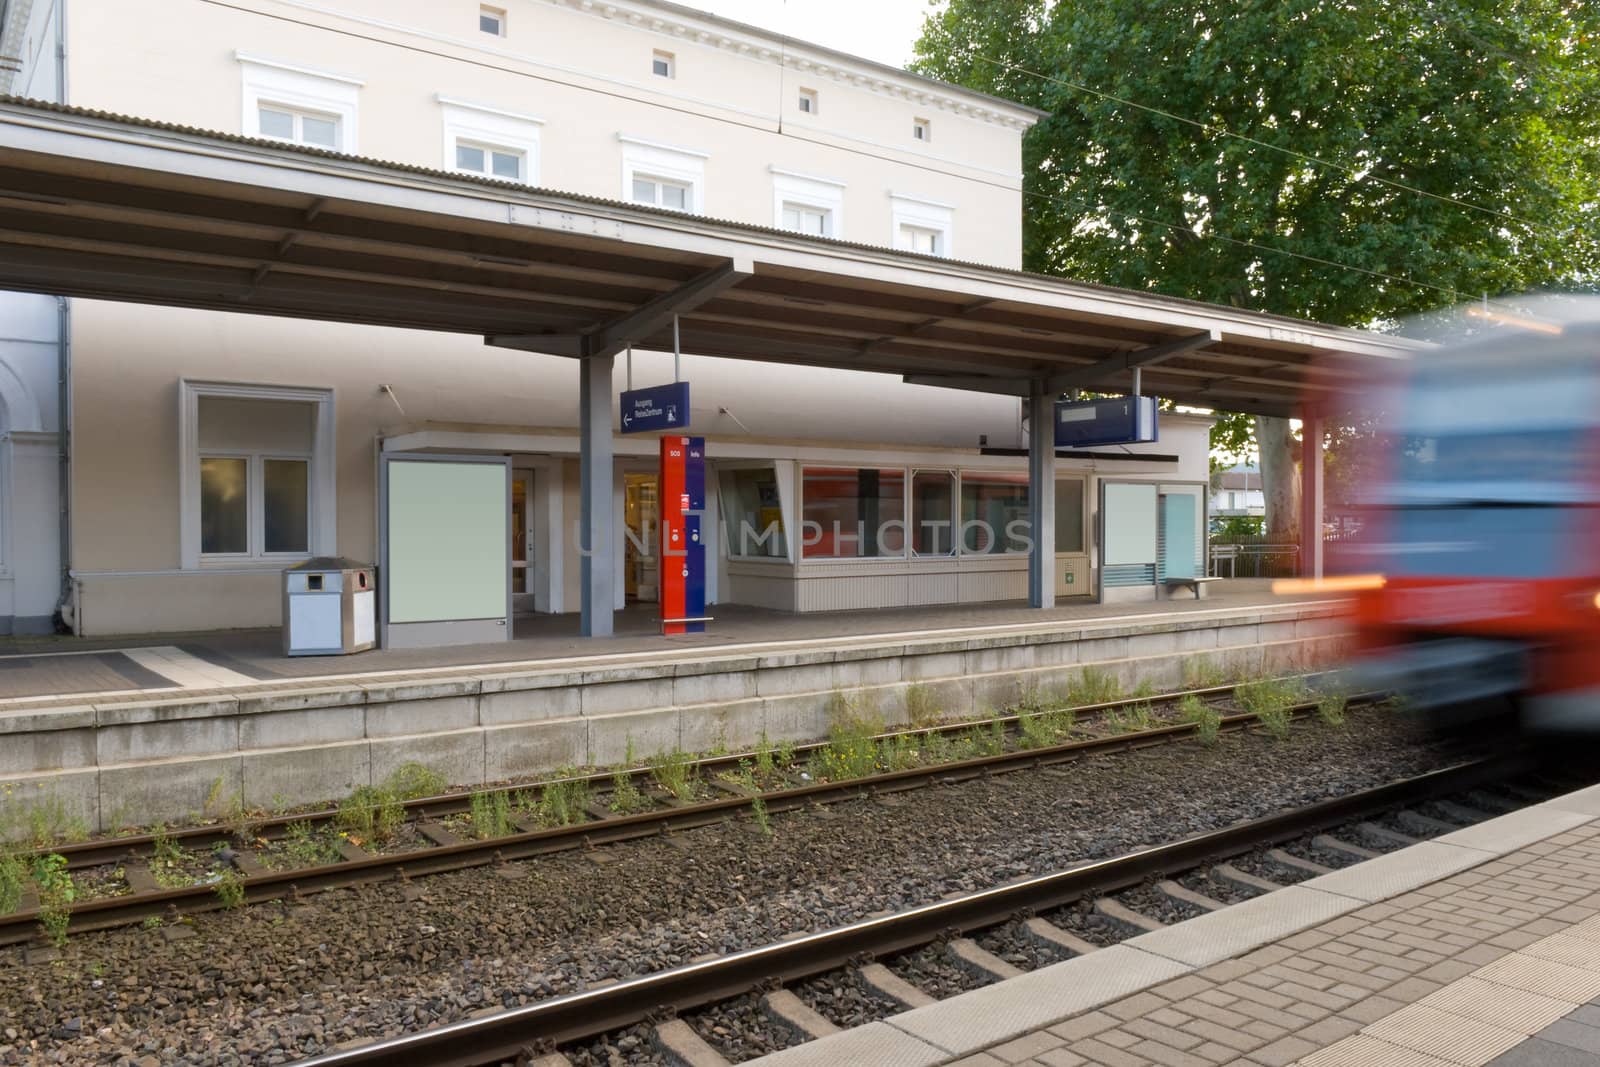 Small railway station with a moving train